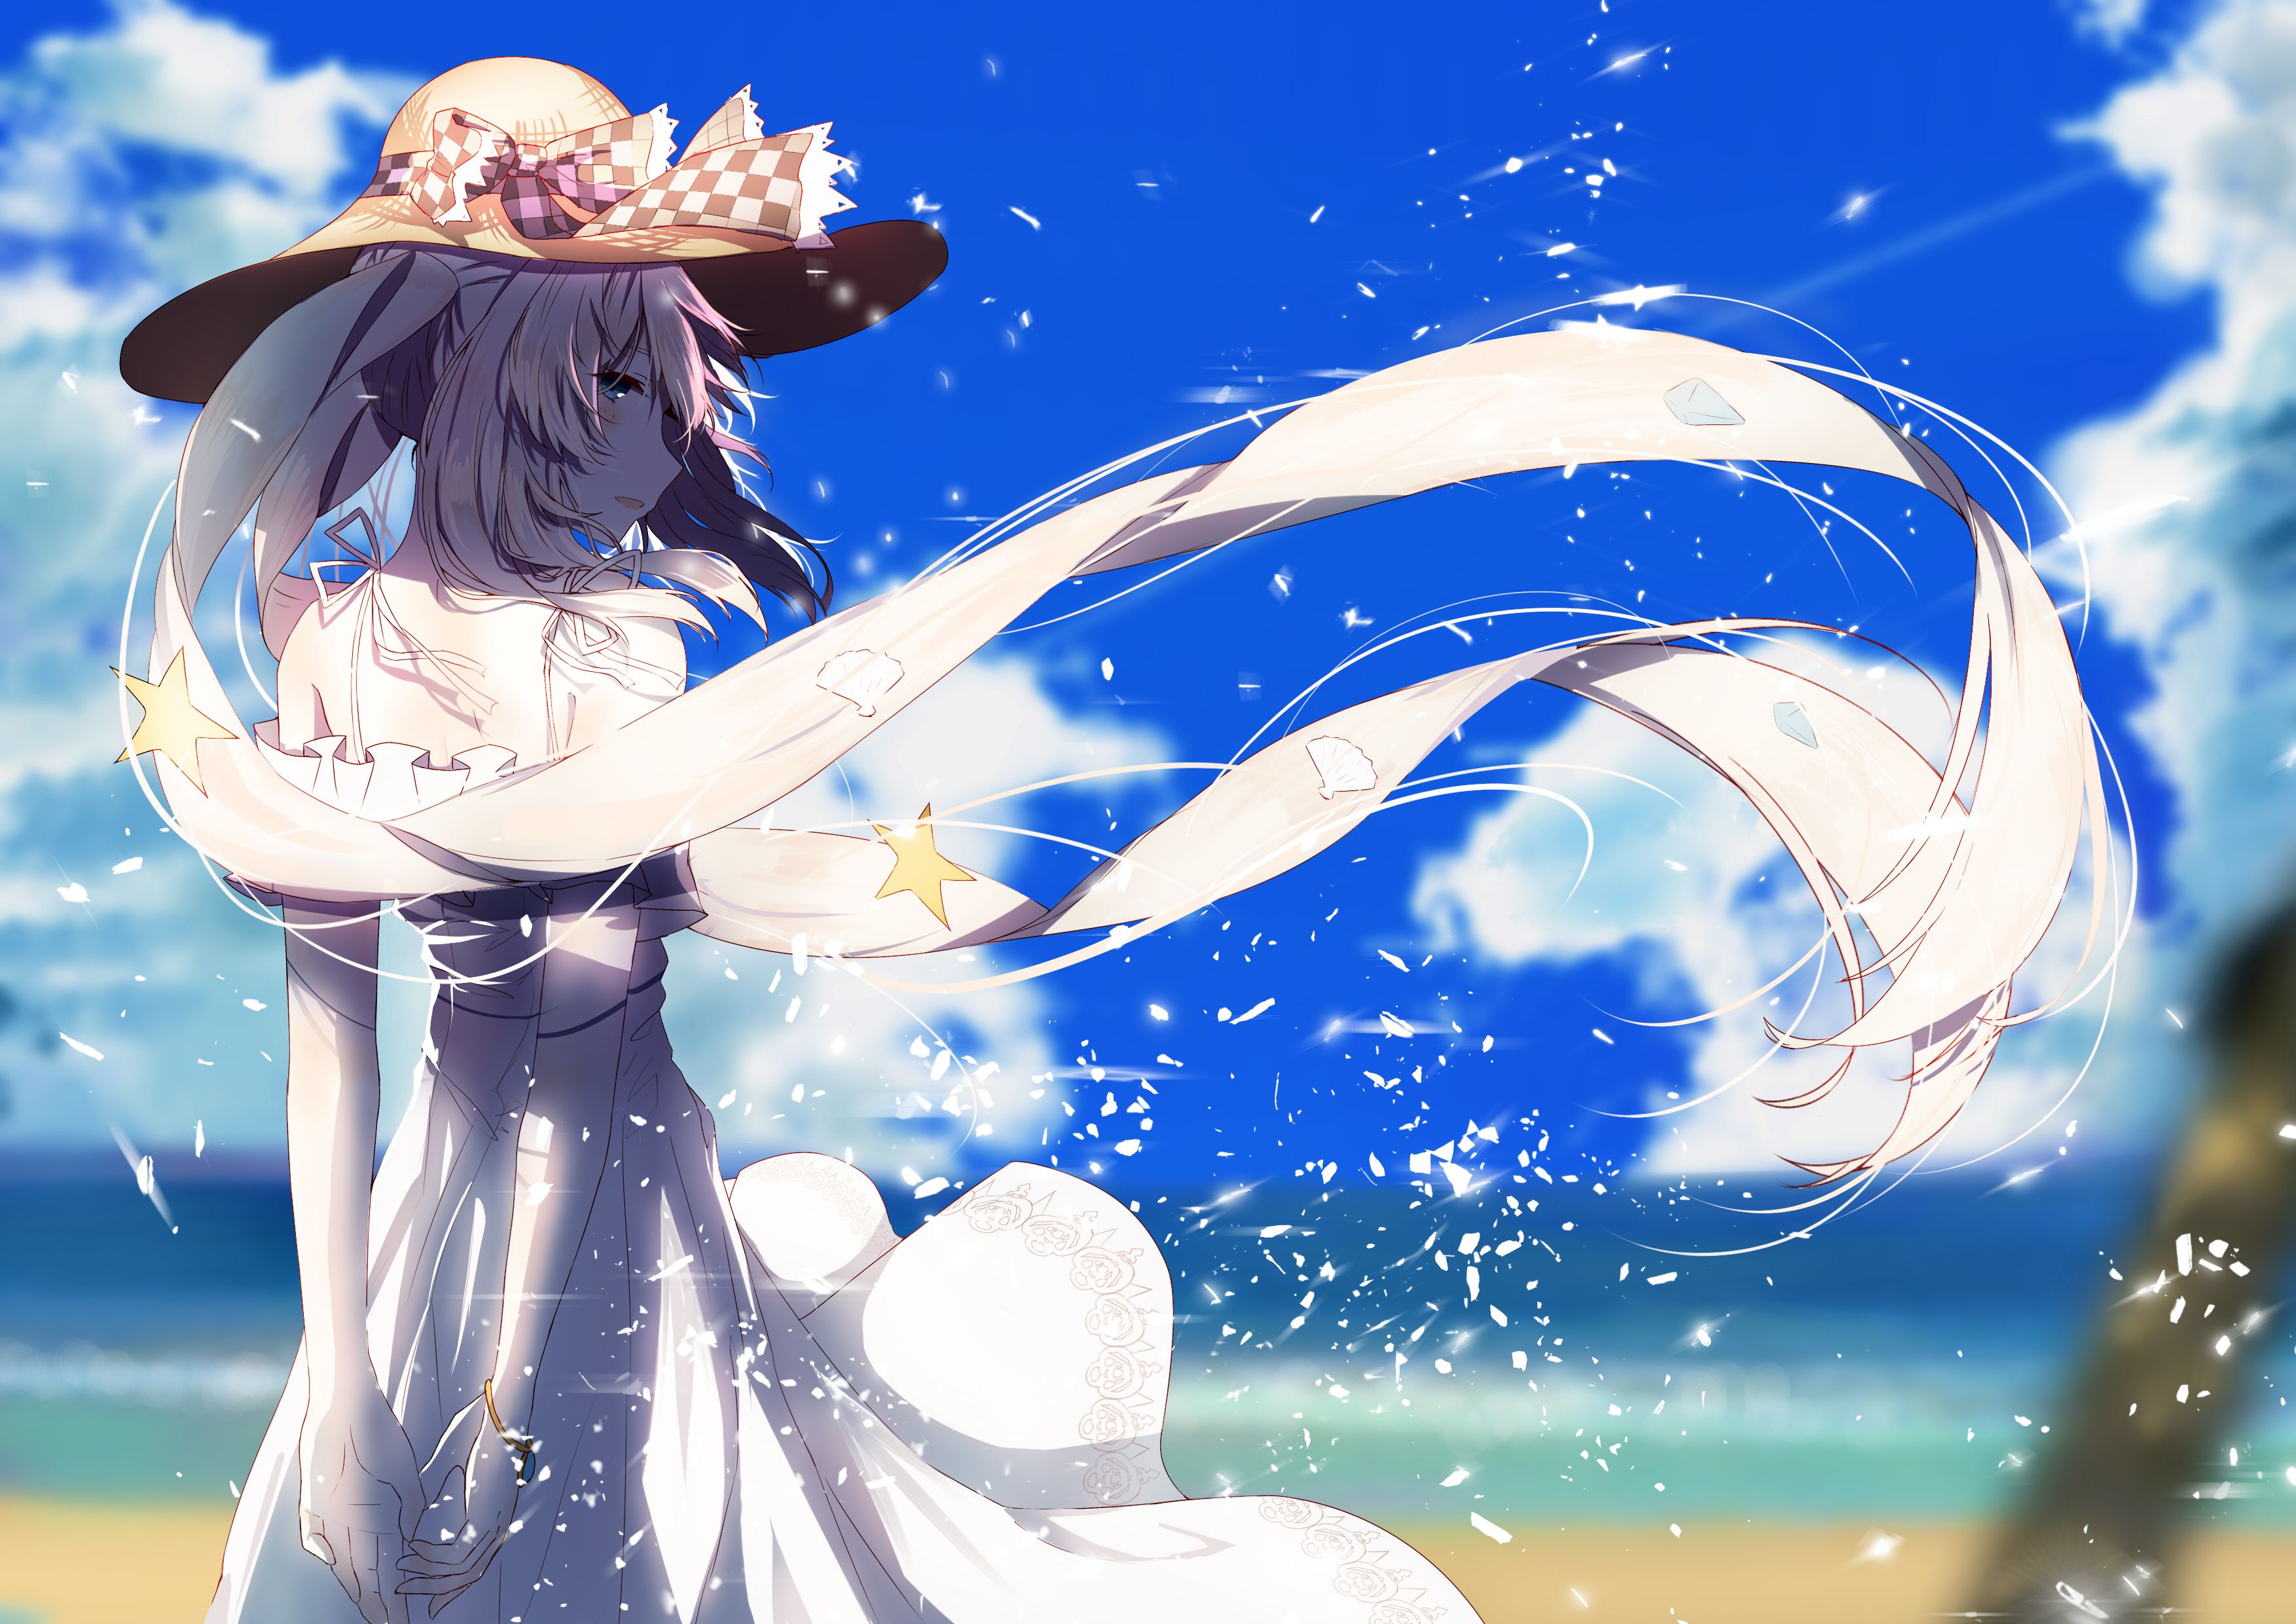 #FateGrand Order, #windy, #water, #clouds, #twintails